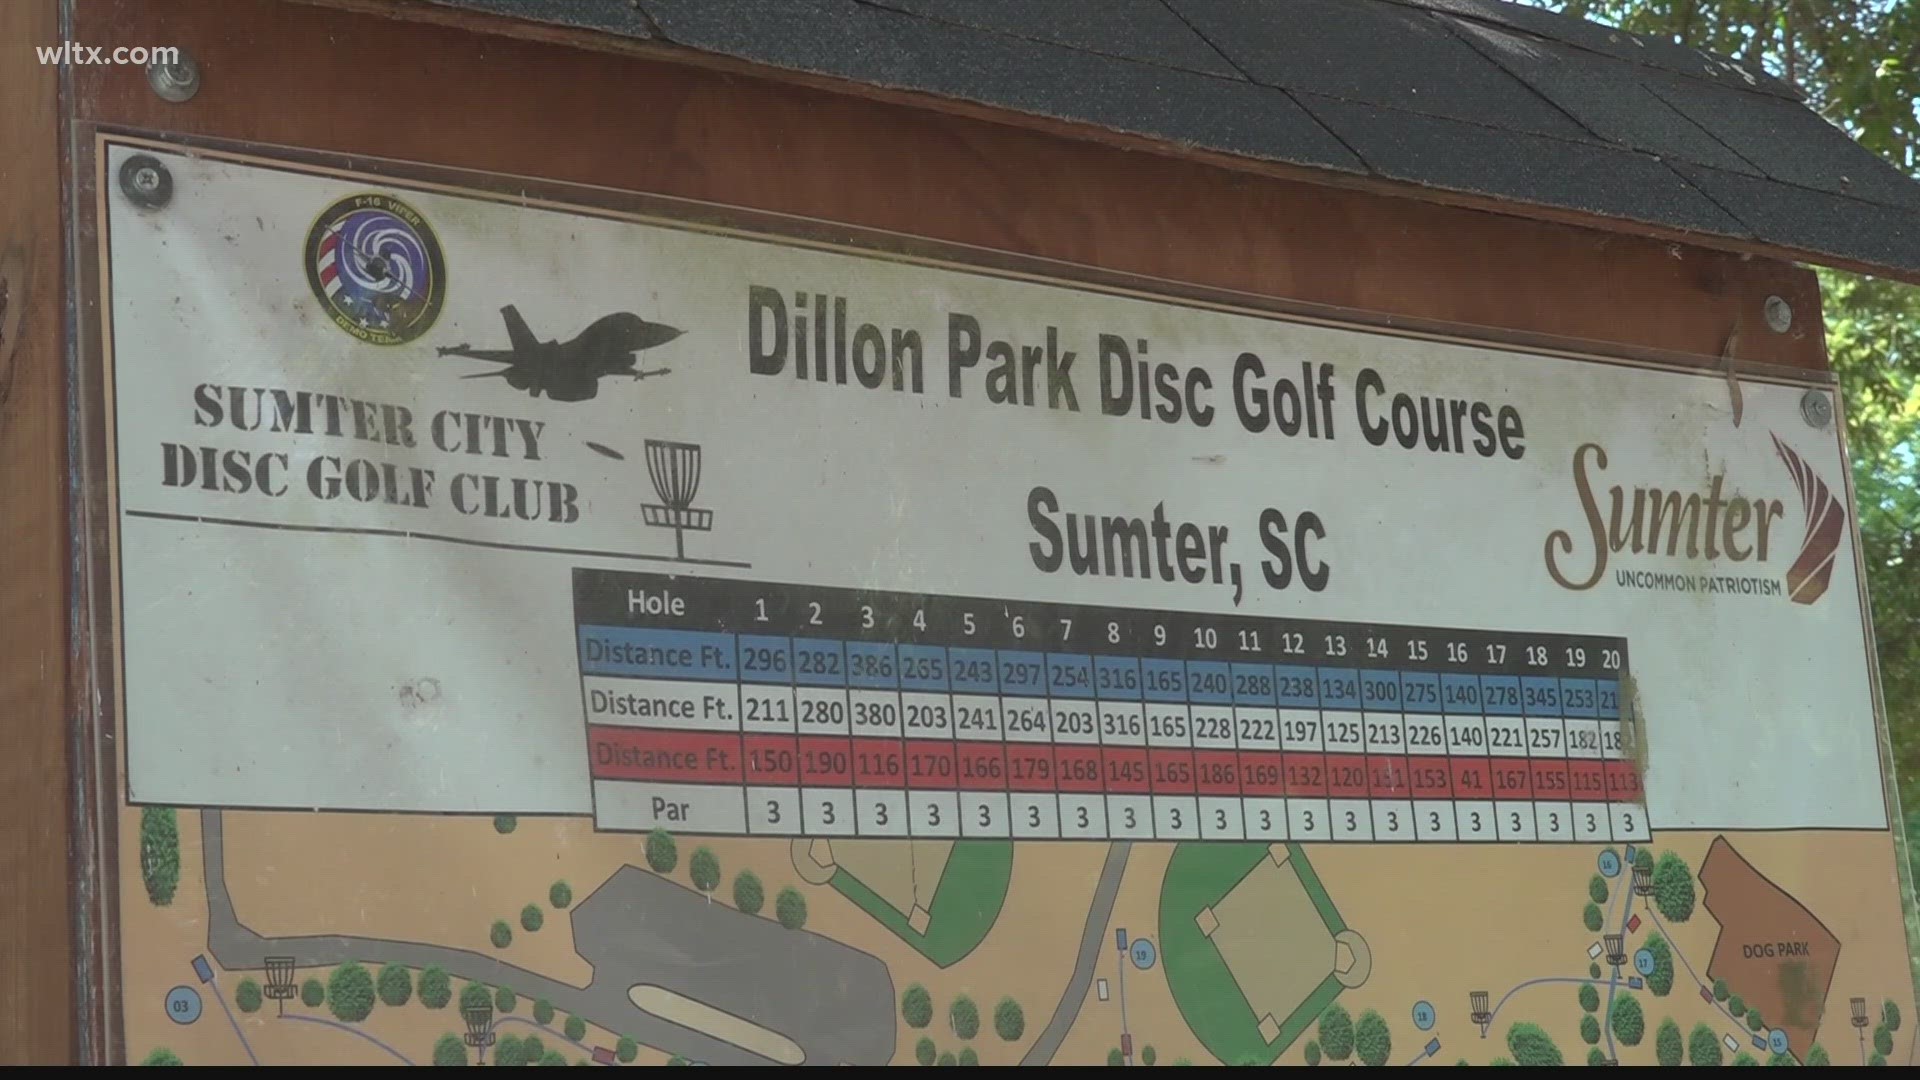 The Sumter City Disc Golf Club is hosting the Shoney's Summer Sizzler Disc Golf tournament at Dillon Part on Saturday-80 registration spots are open.